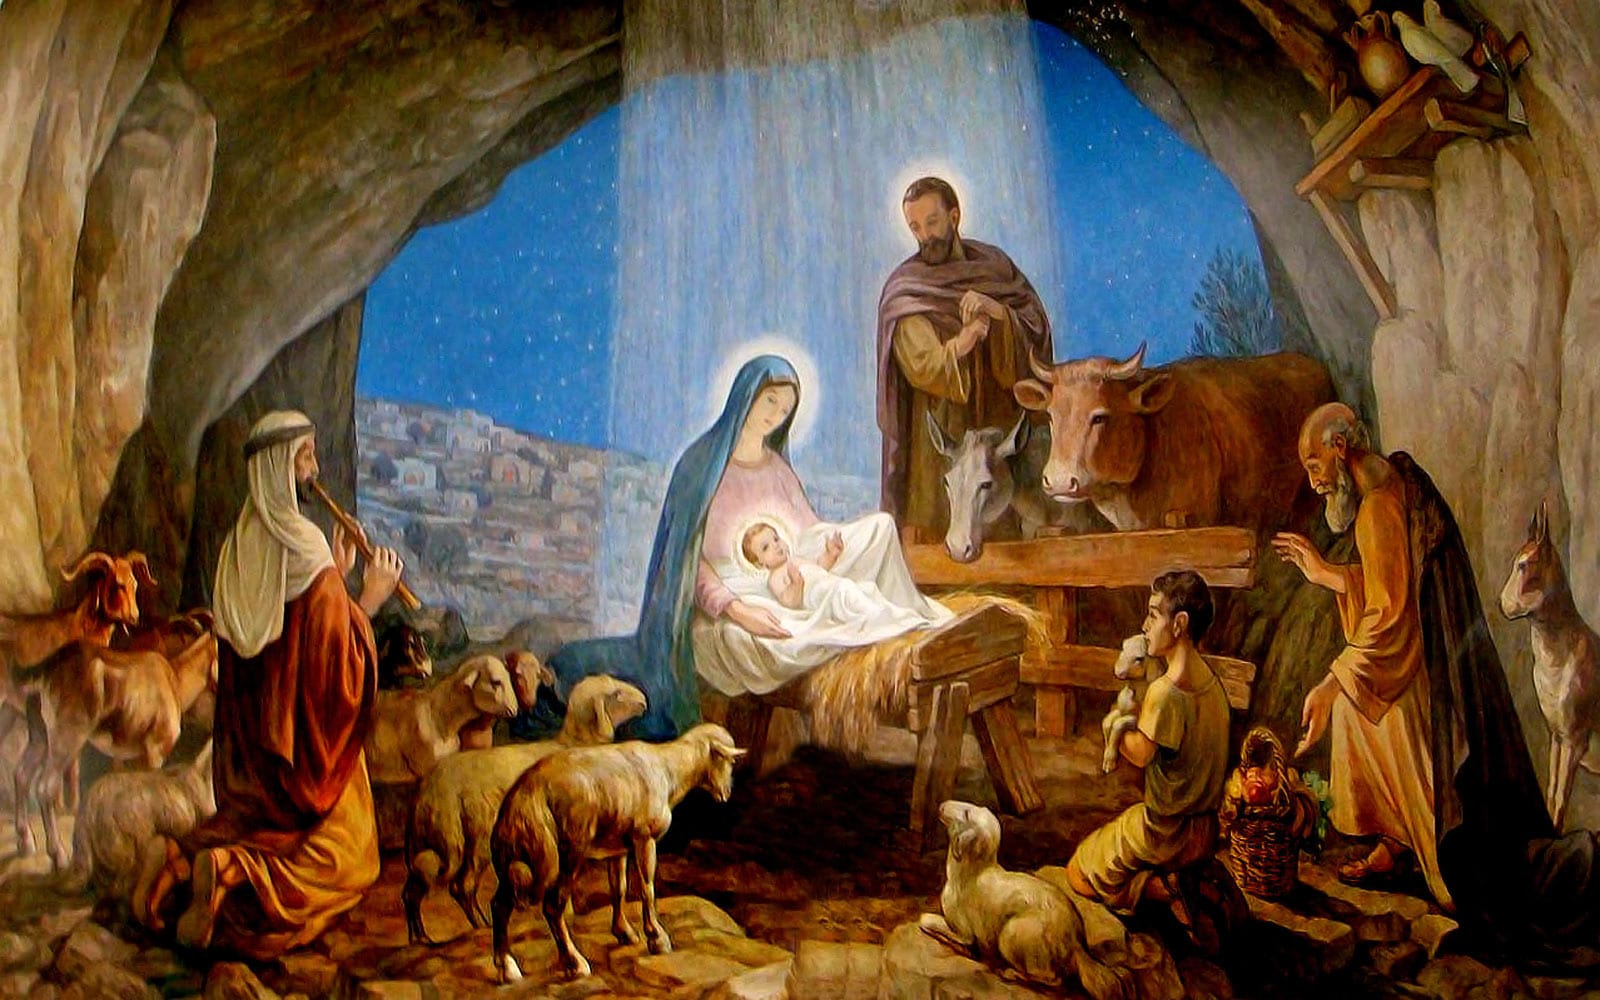 the-nativity-scene-opens-our-hearts-to-the-mystery-of-life-hli